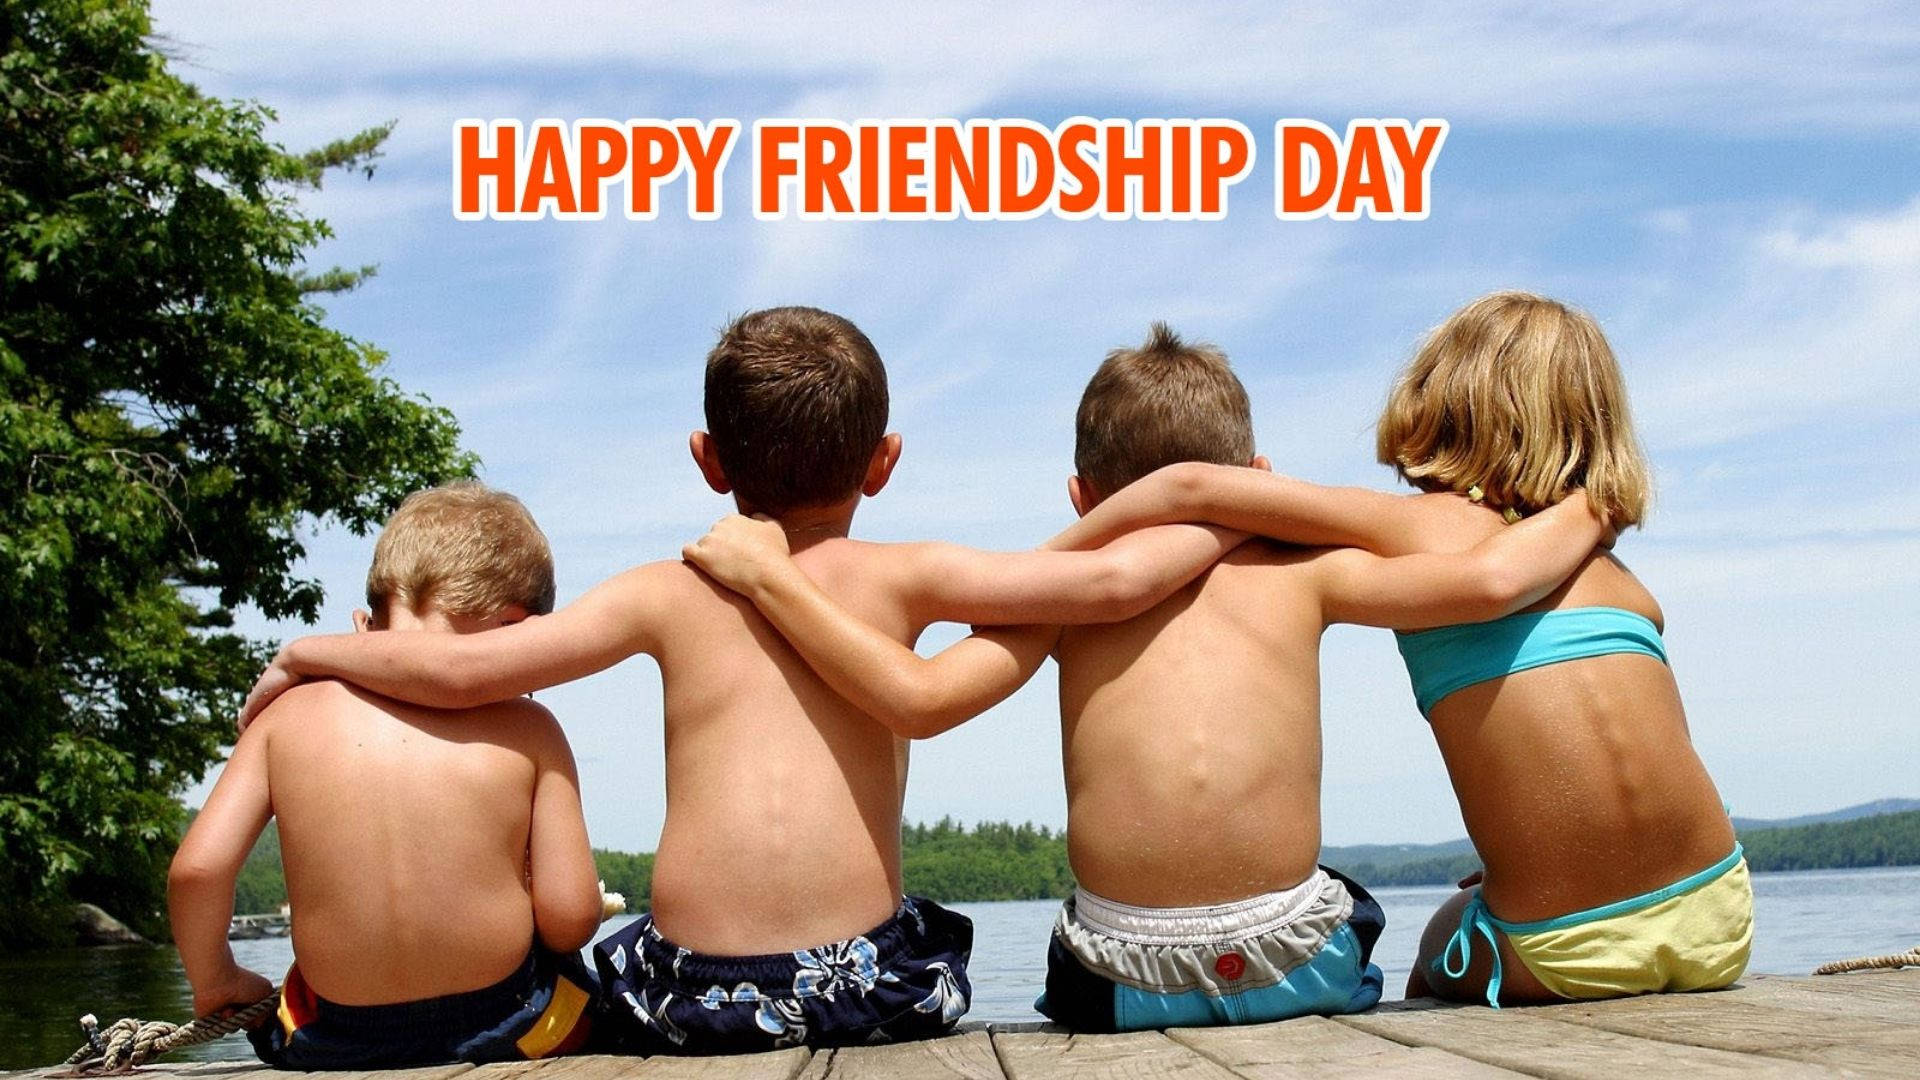 Kids Embracing For Friendship Day